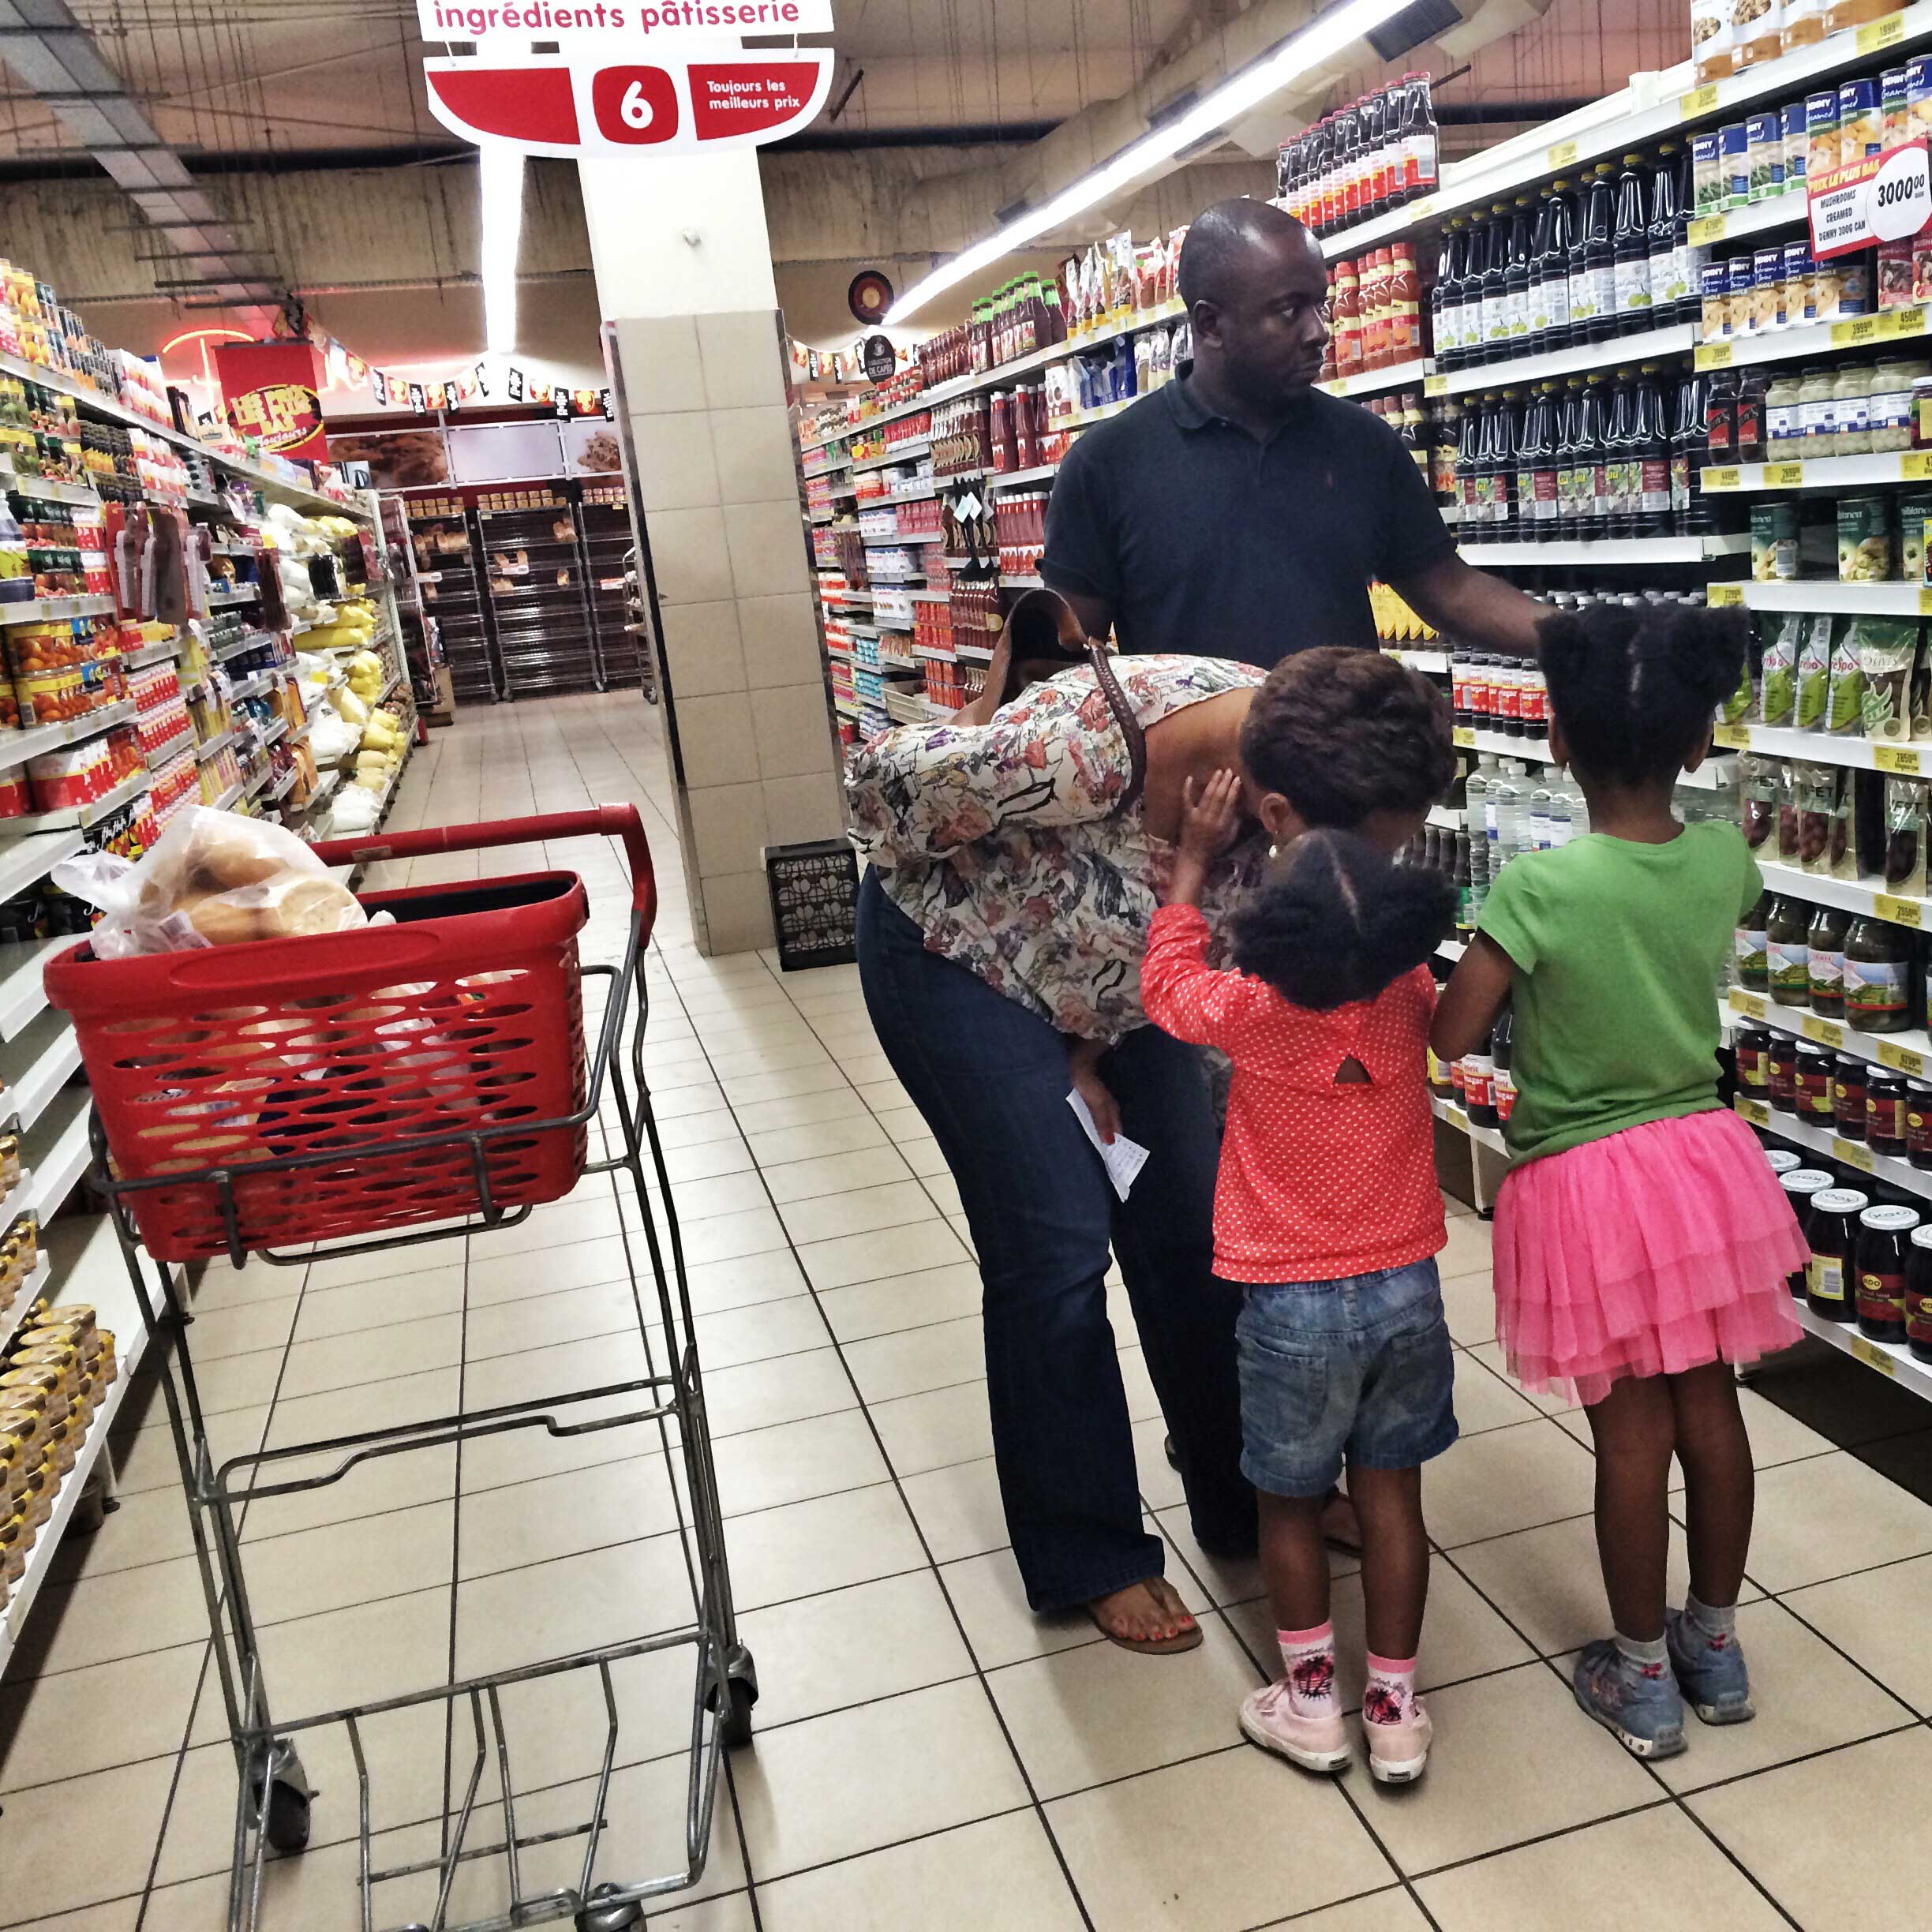 A family shops in a supermarket in Kinshasa, Democratic Republic of Congo, July 4th, 2014.